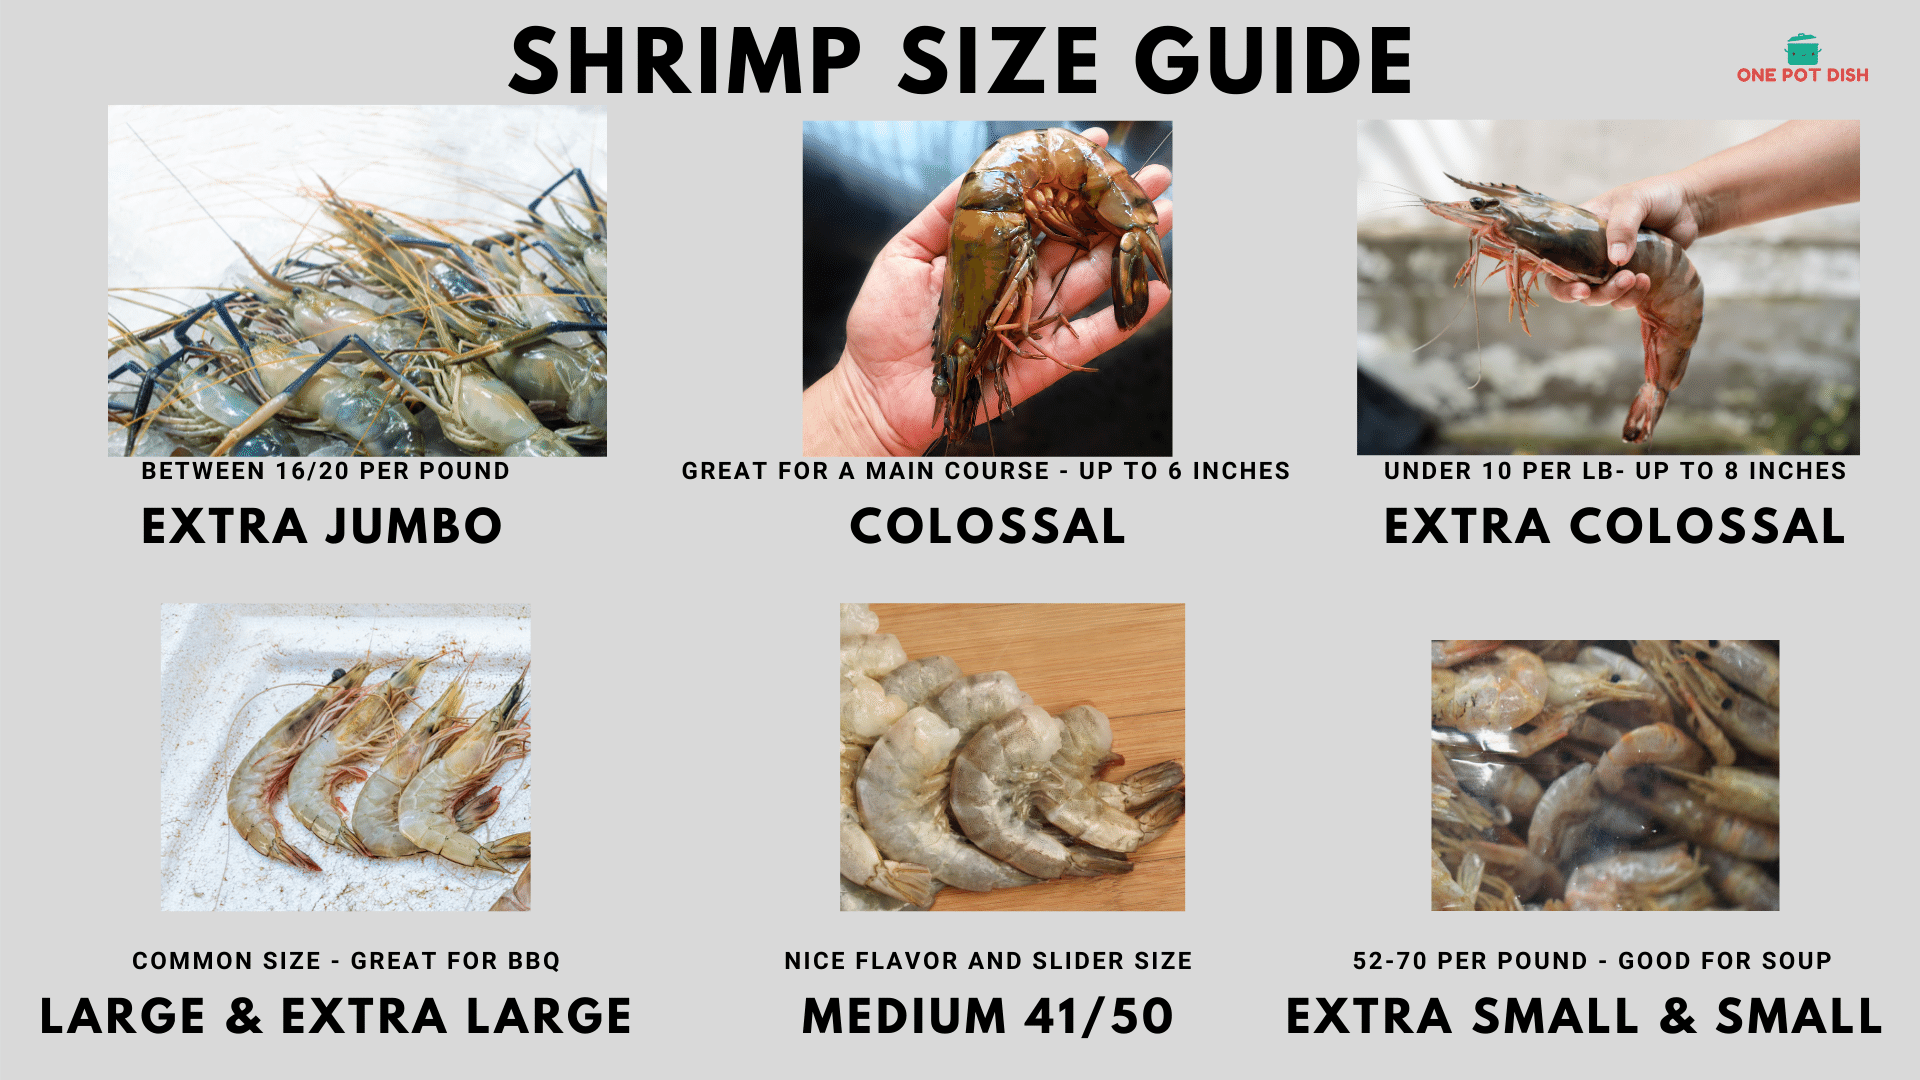 How Many Pounds Of Shrimp Per Person For A Big Group